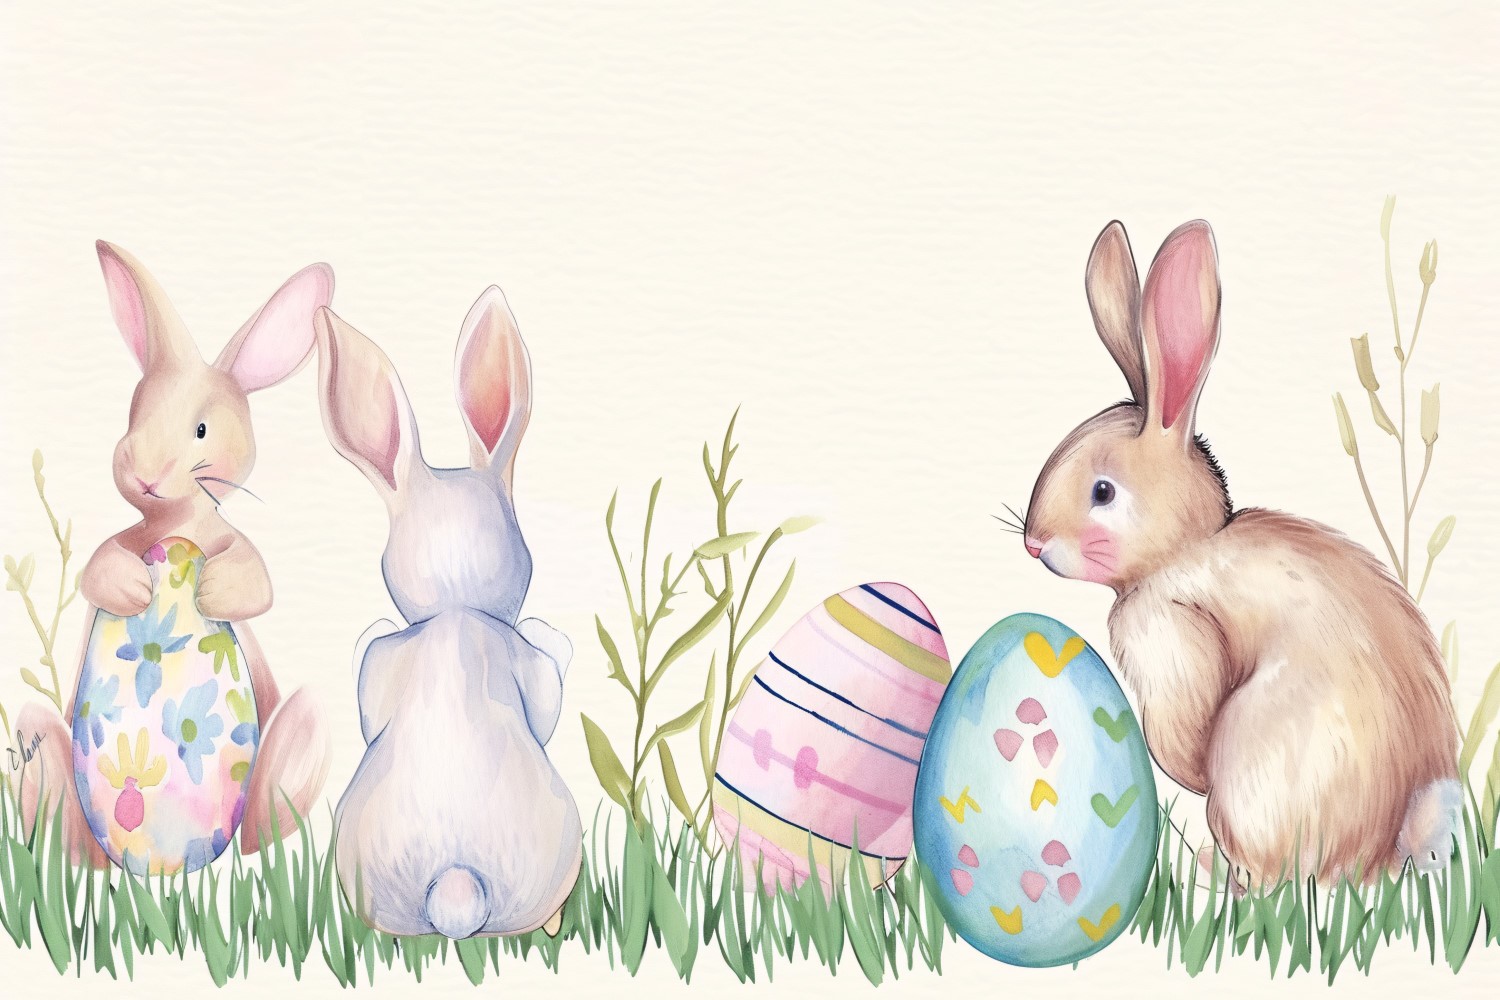 Watercolour Easter Bunnies With Colourful Easter Eggs 3